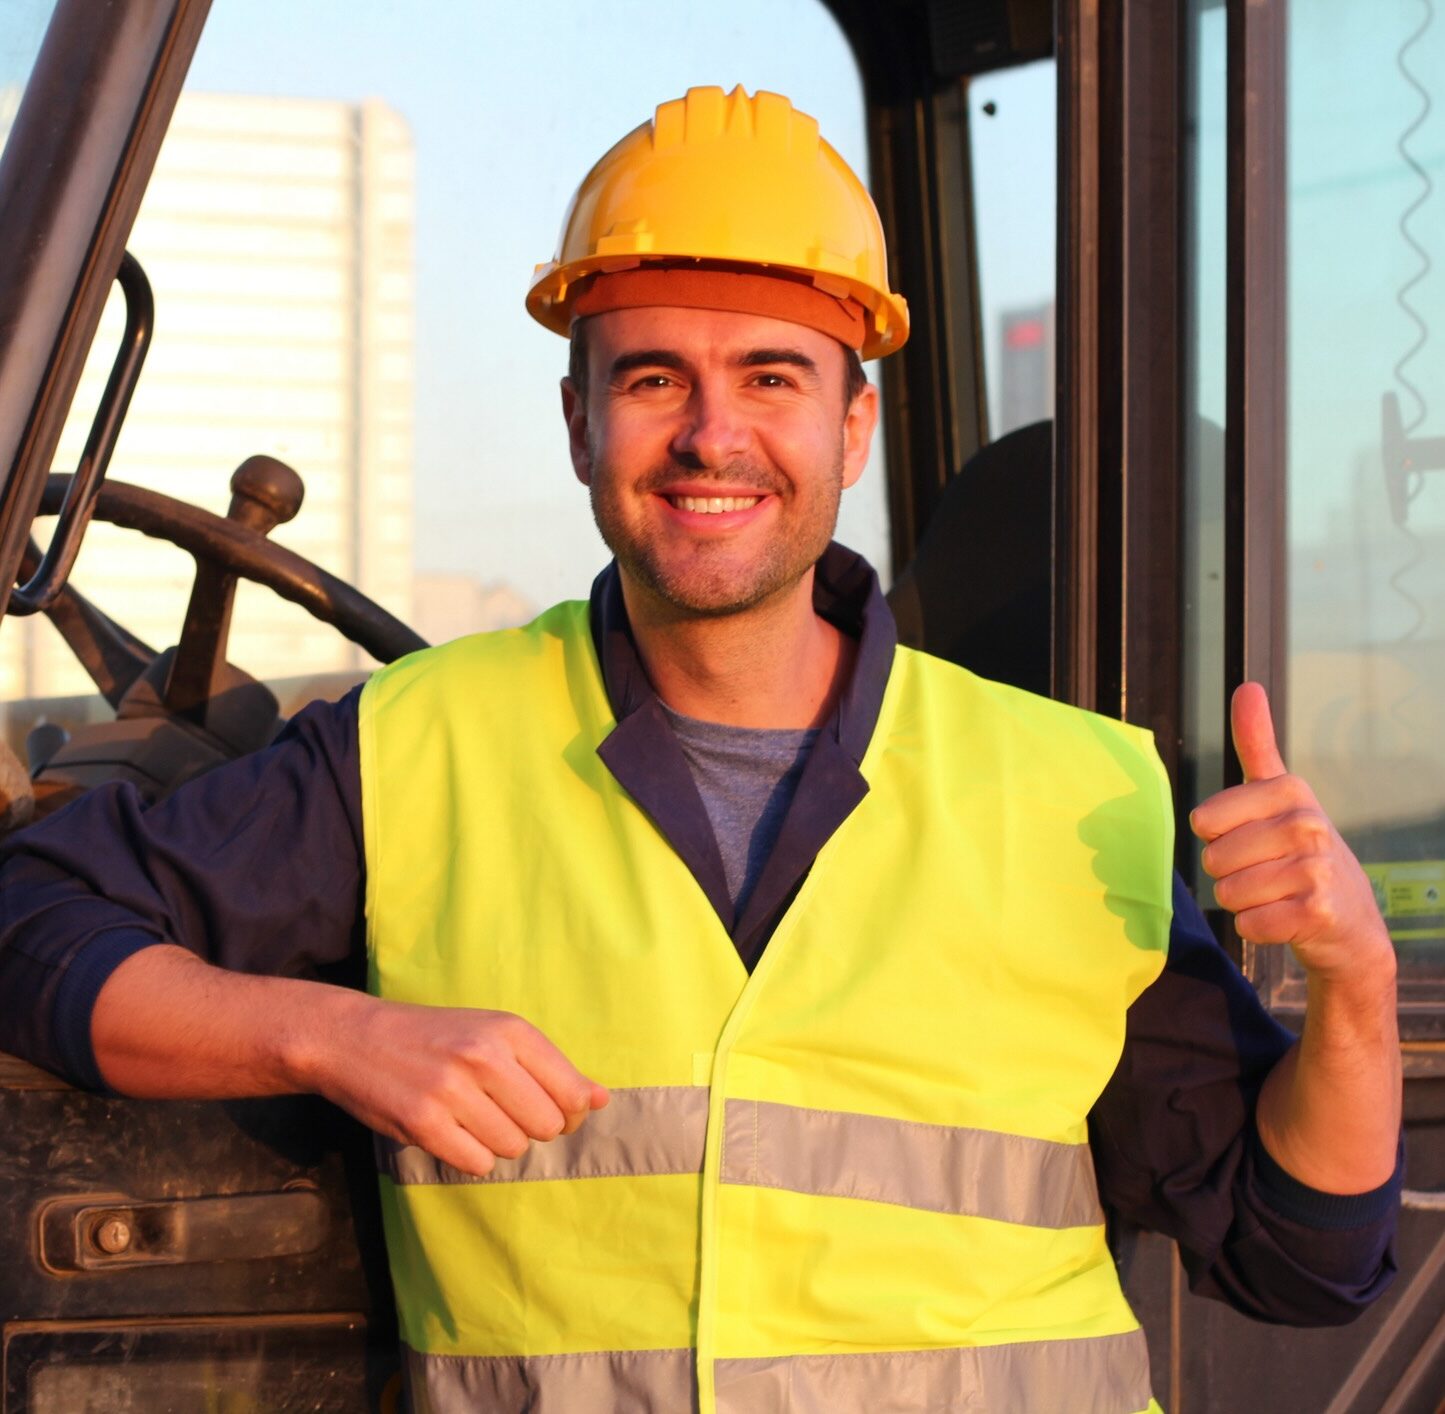 Professional construction industry driver giving thumbs up.